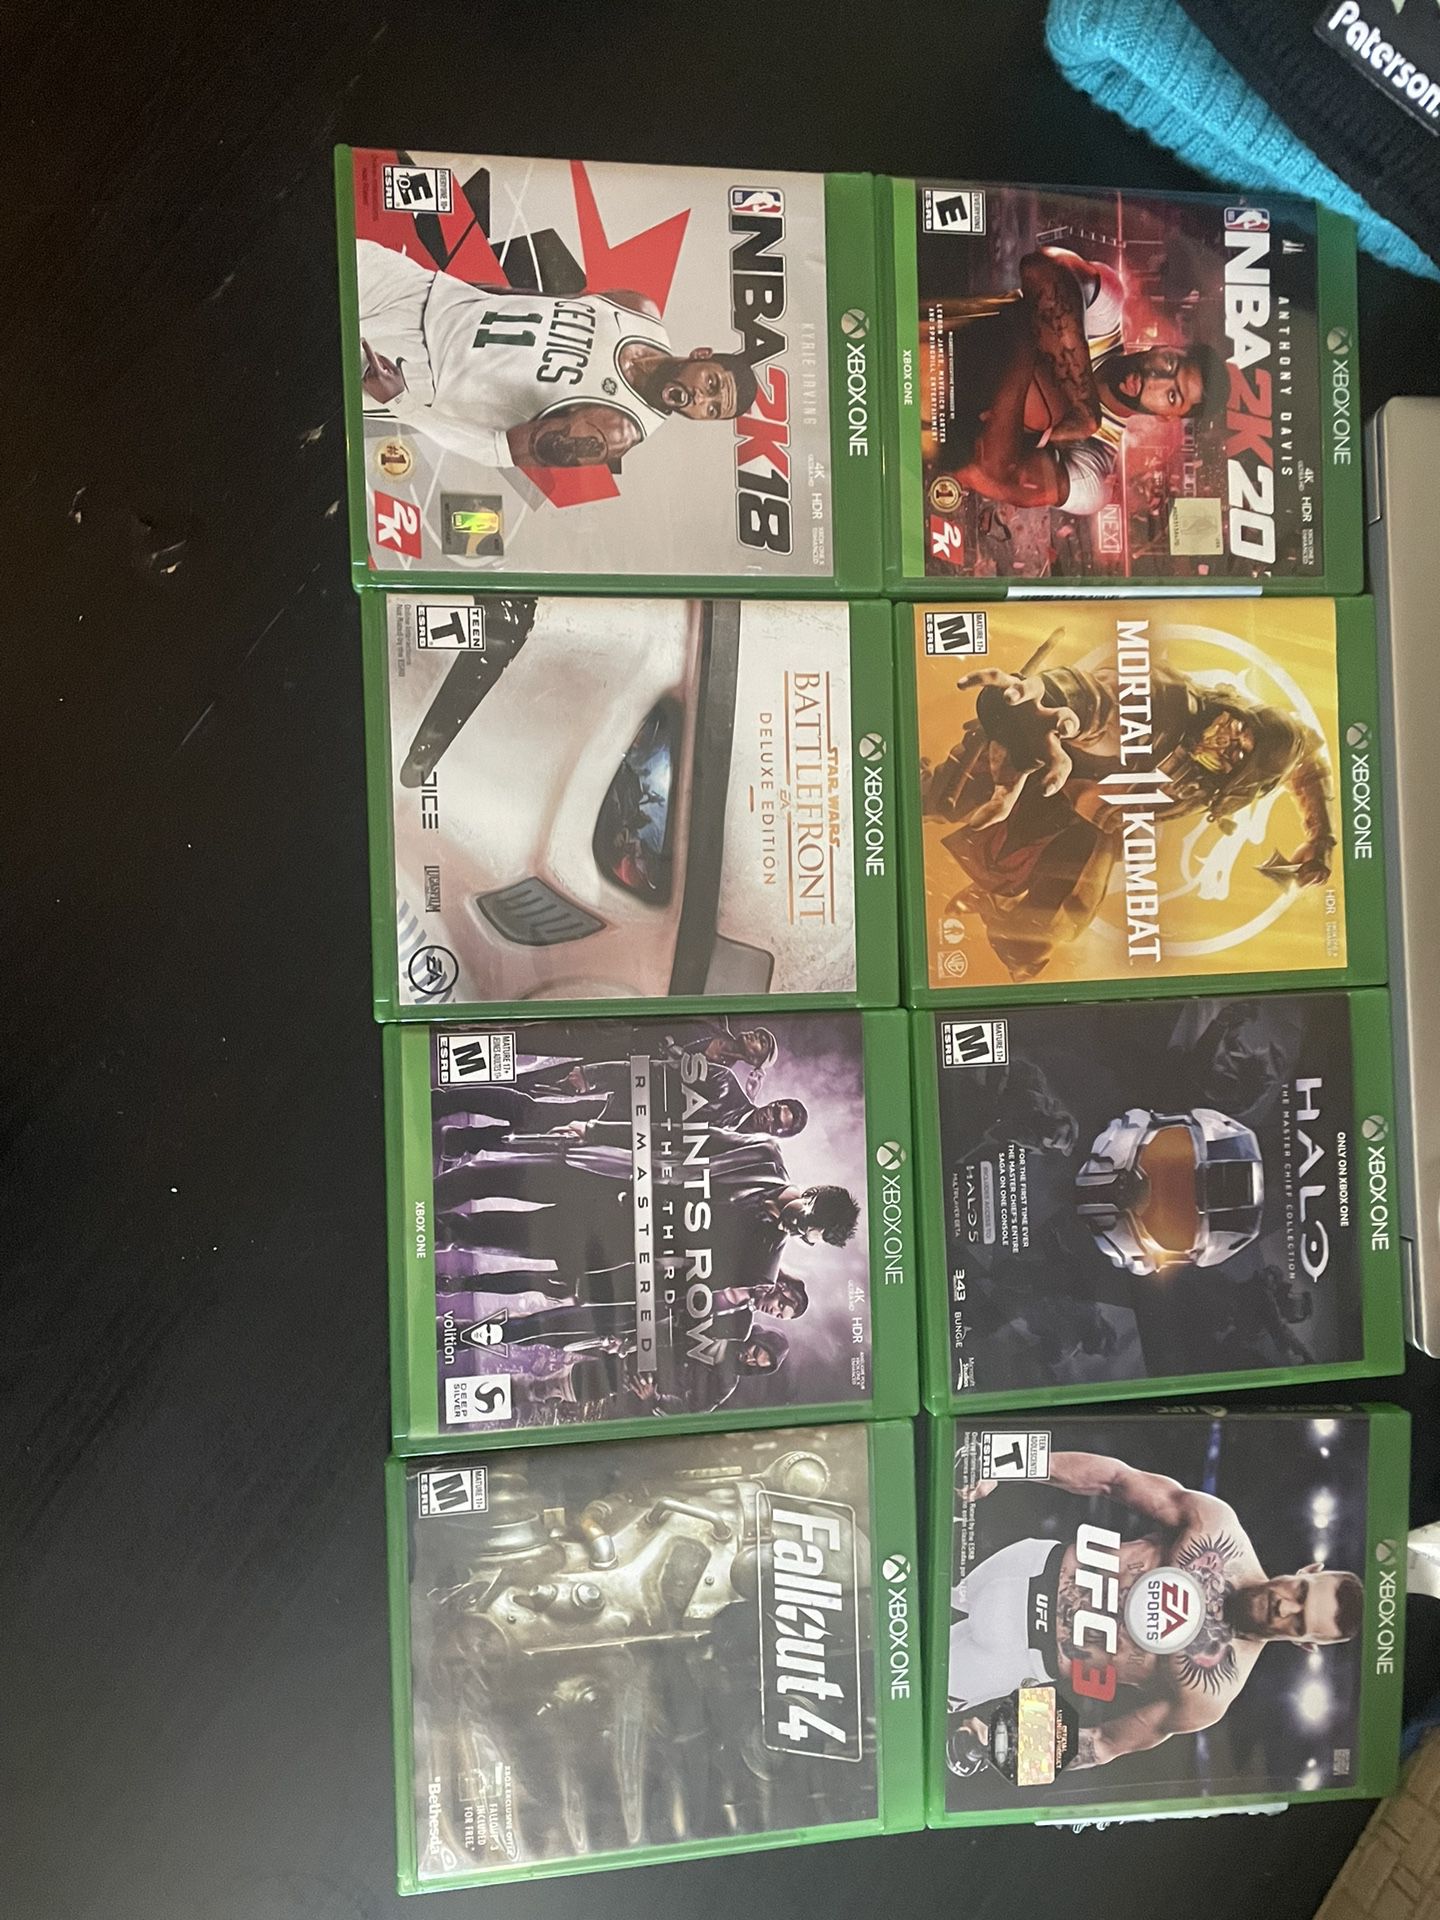 Xbox One, Headset And Games